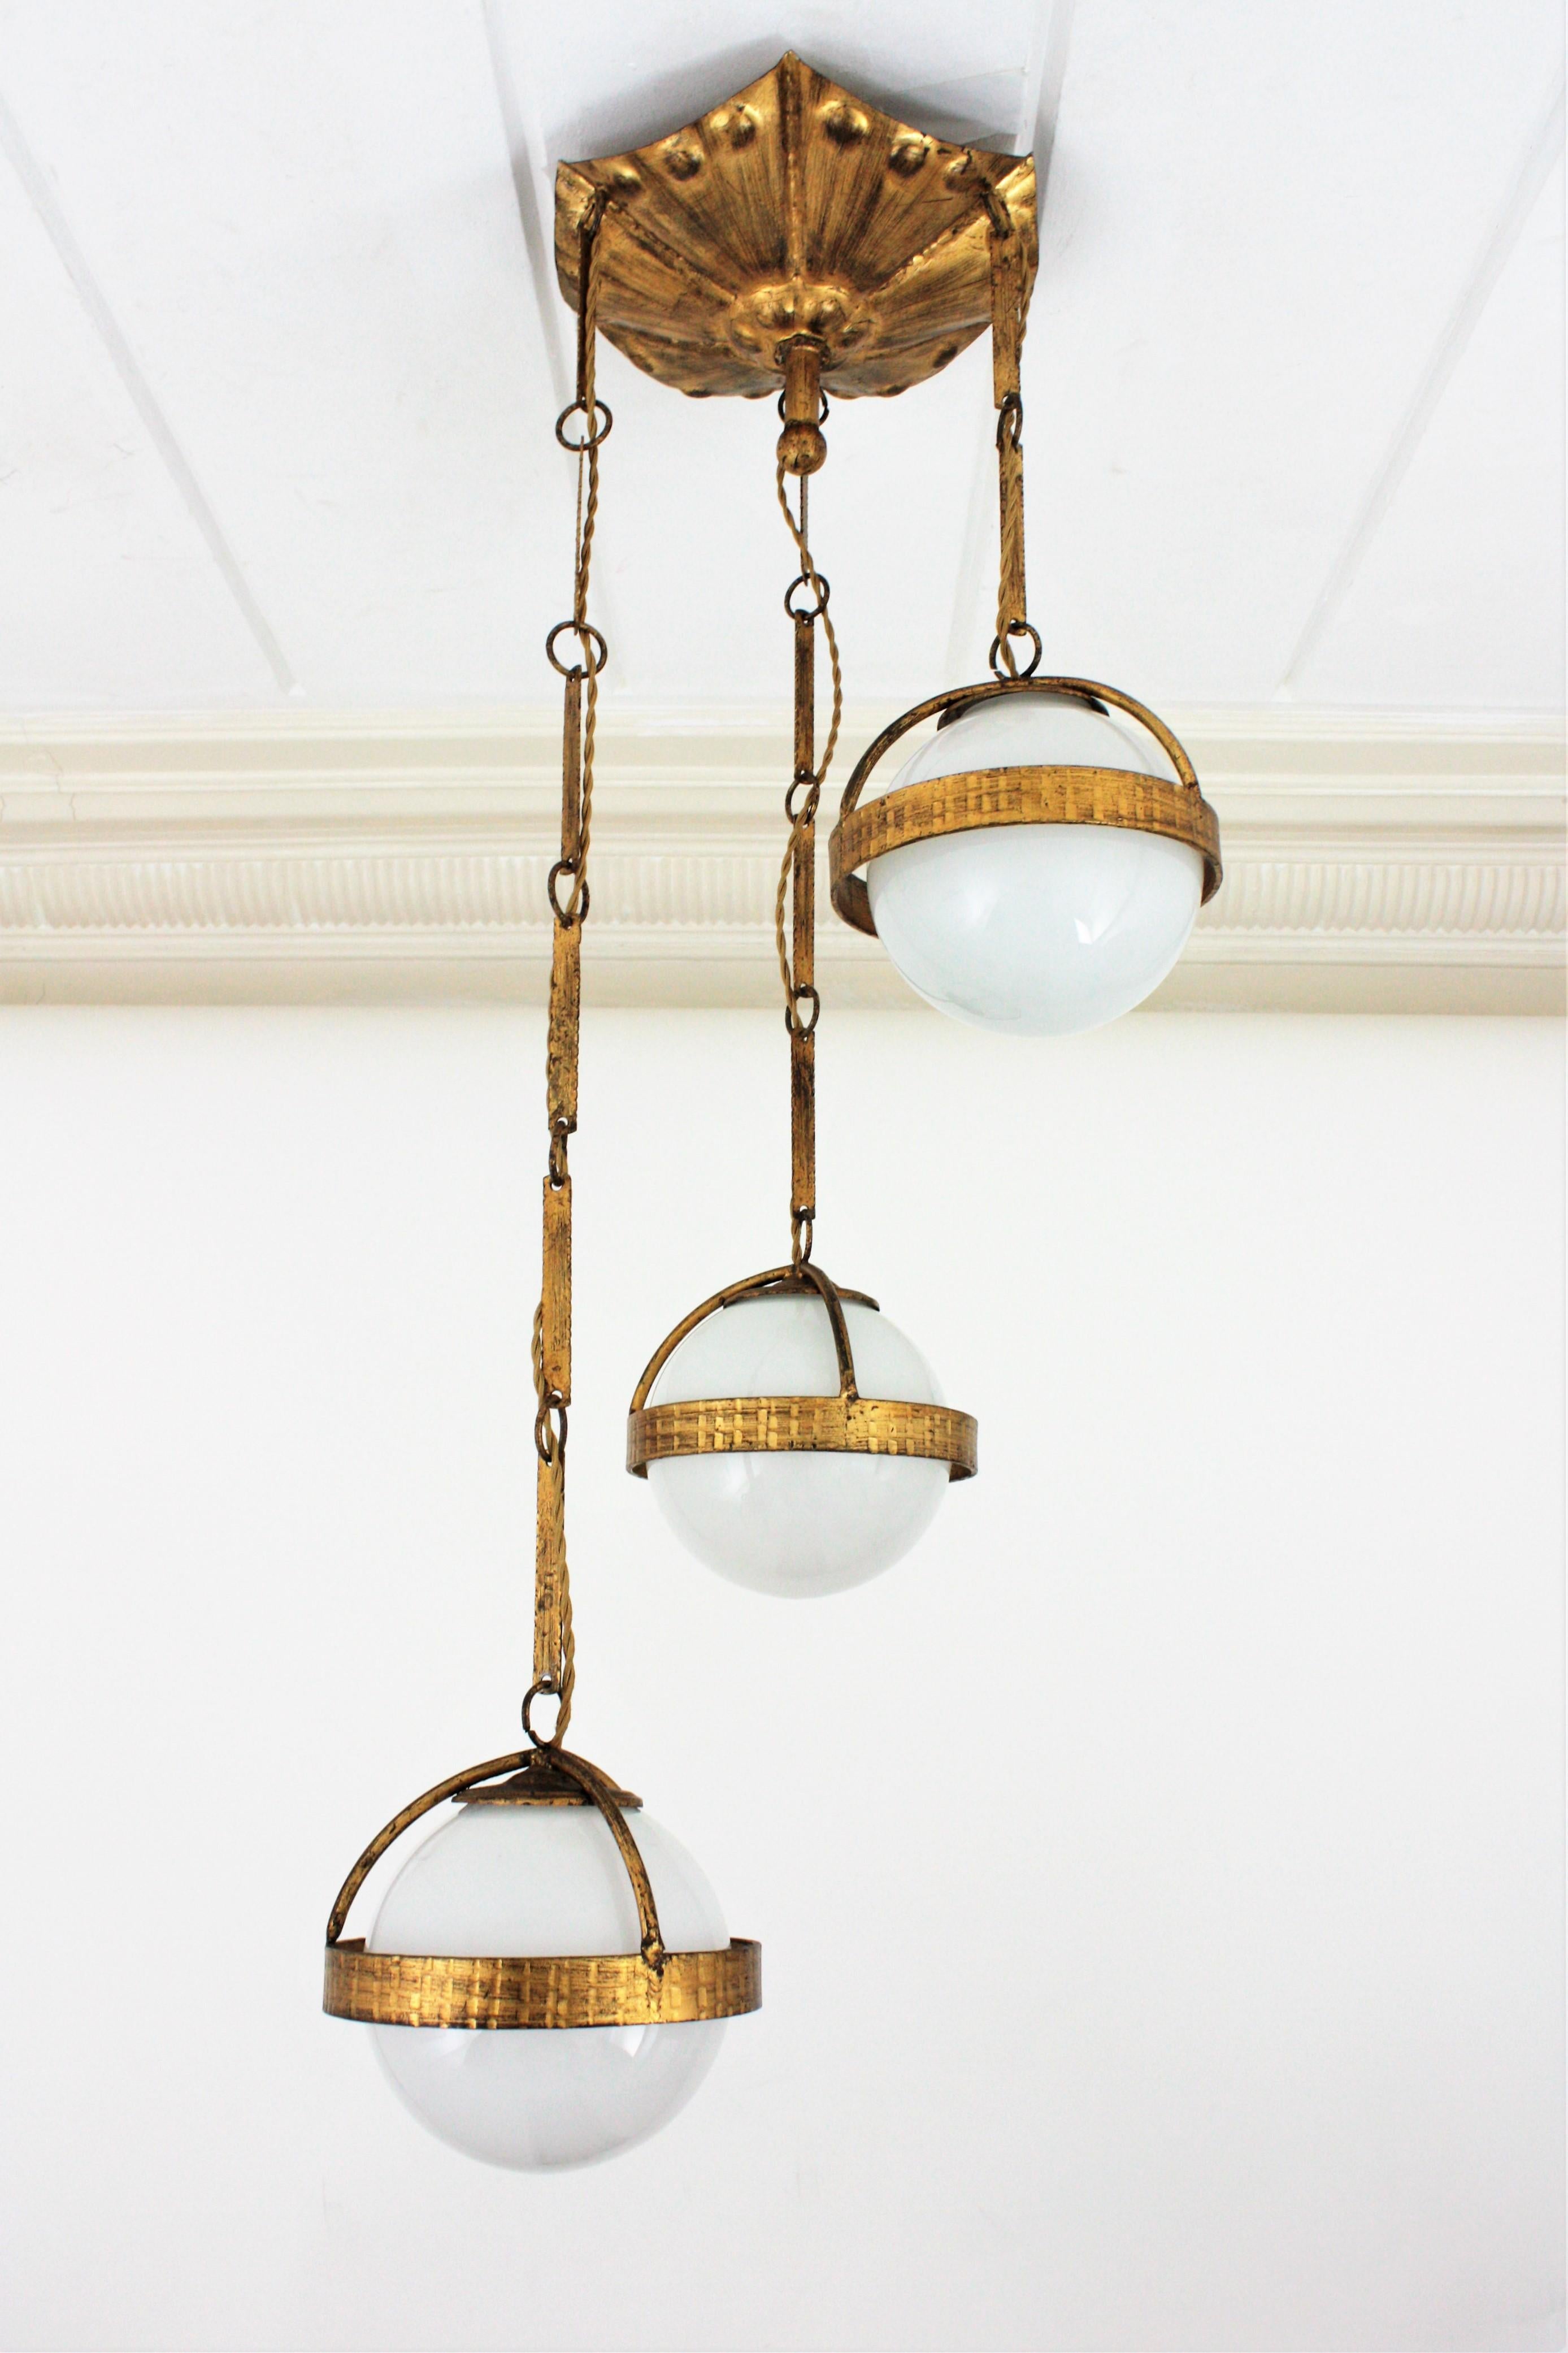 Forged Spanish Cascade Chandelier / Pendant in Gilt Wrought Iron with Glass Globes